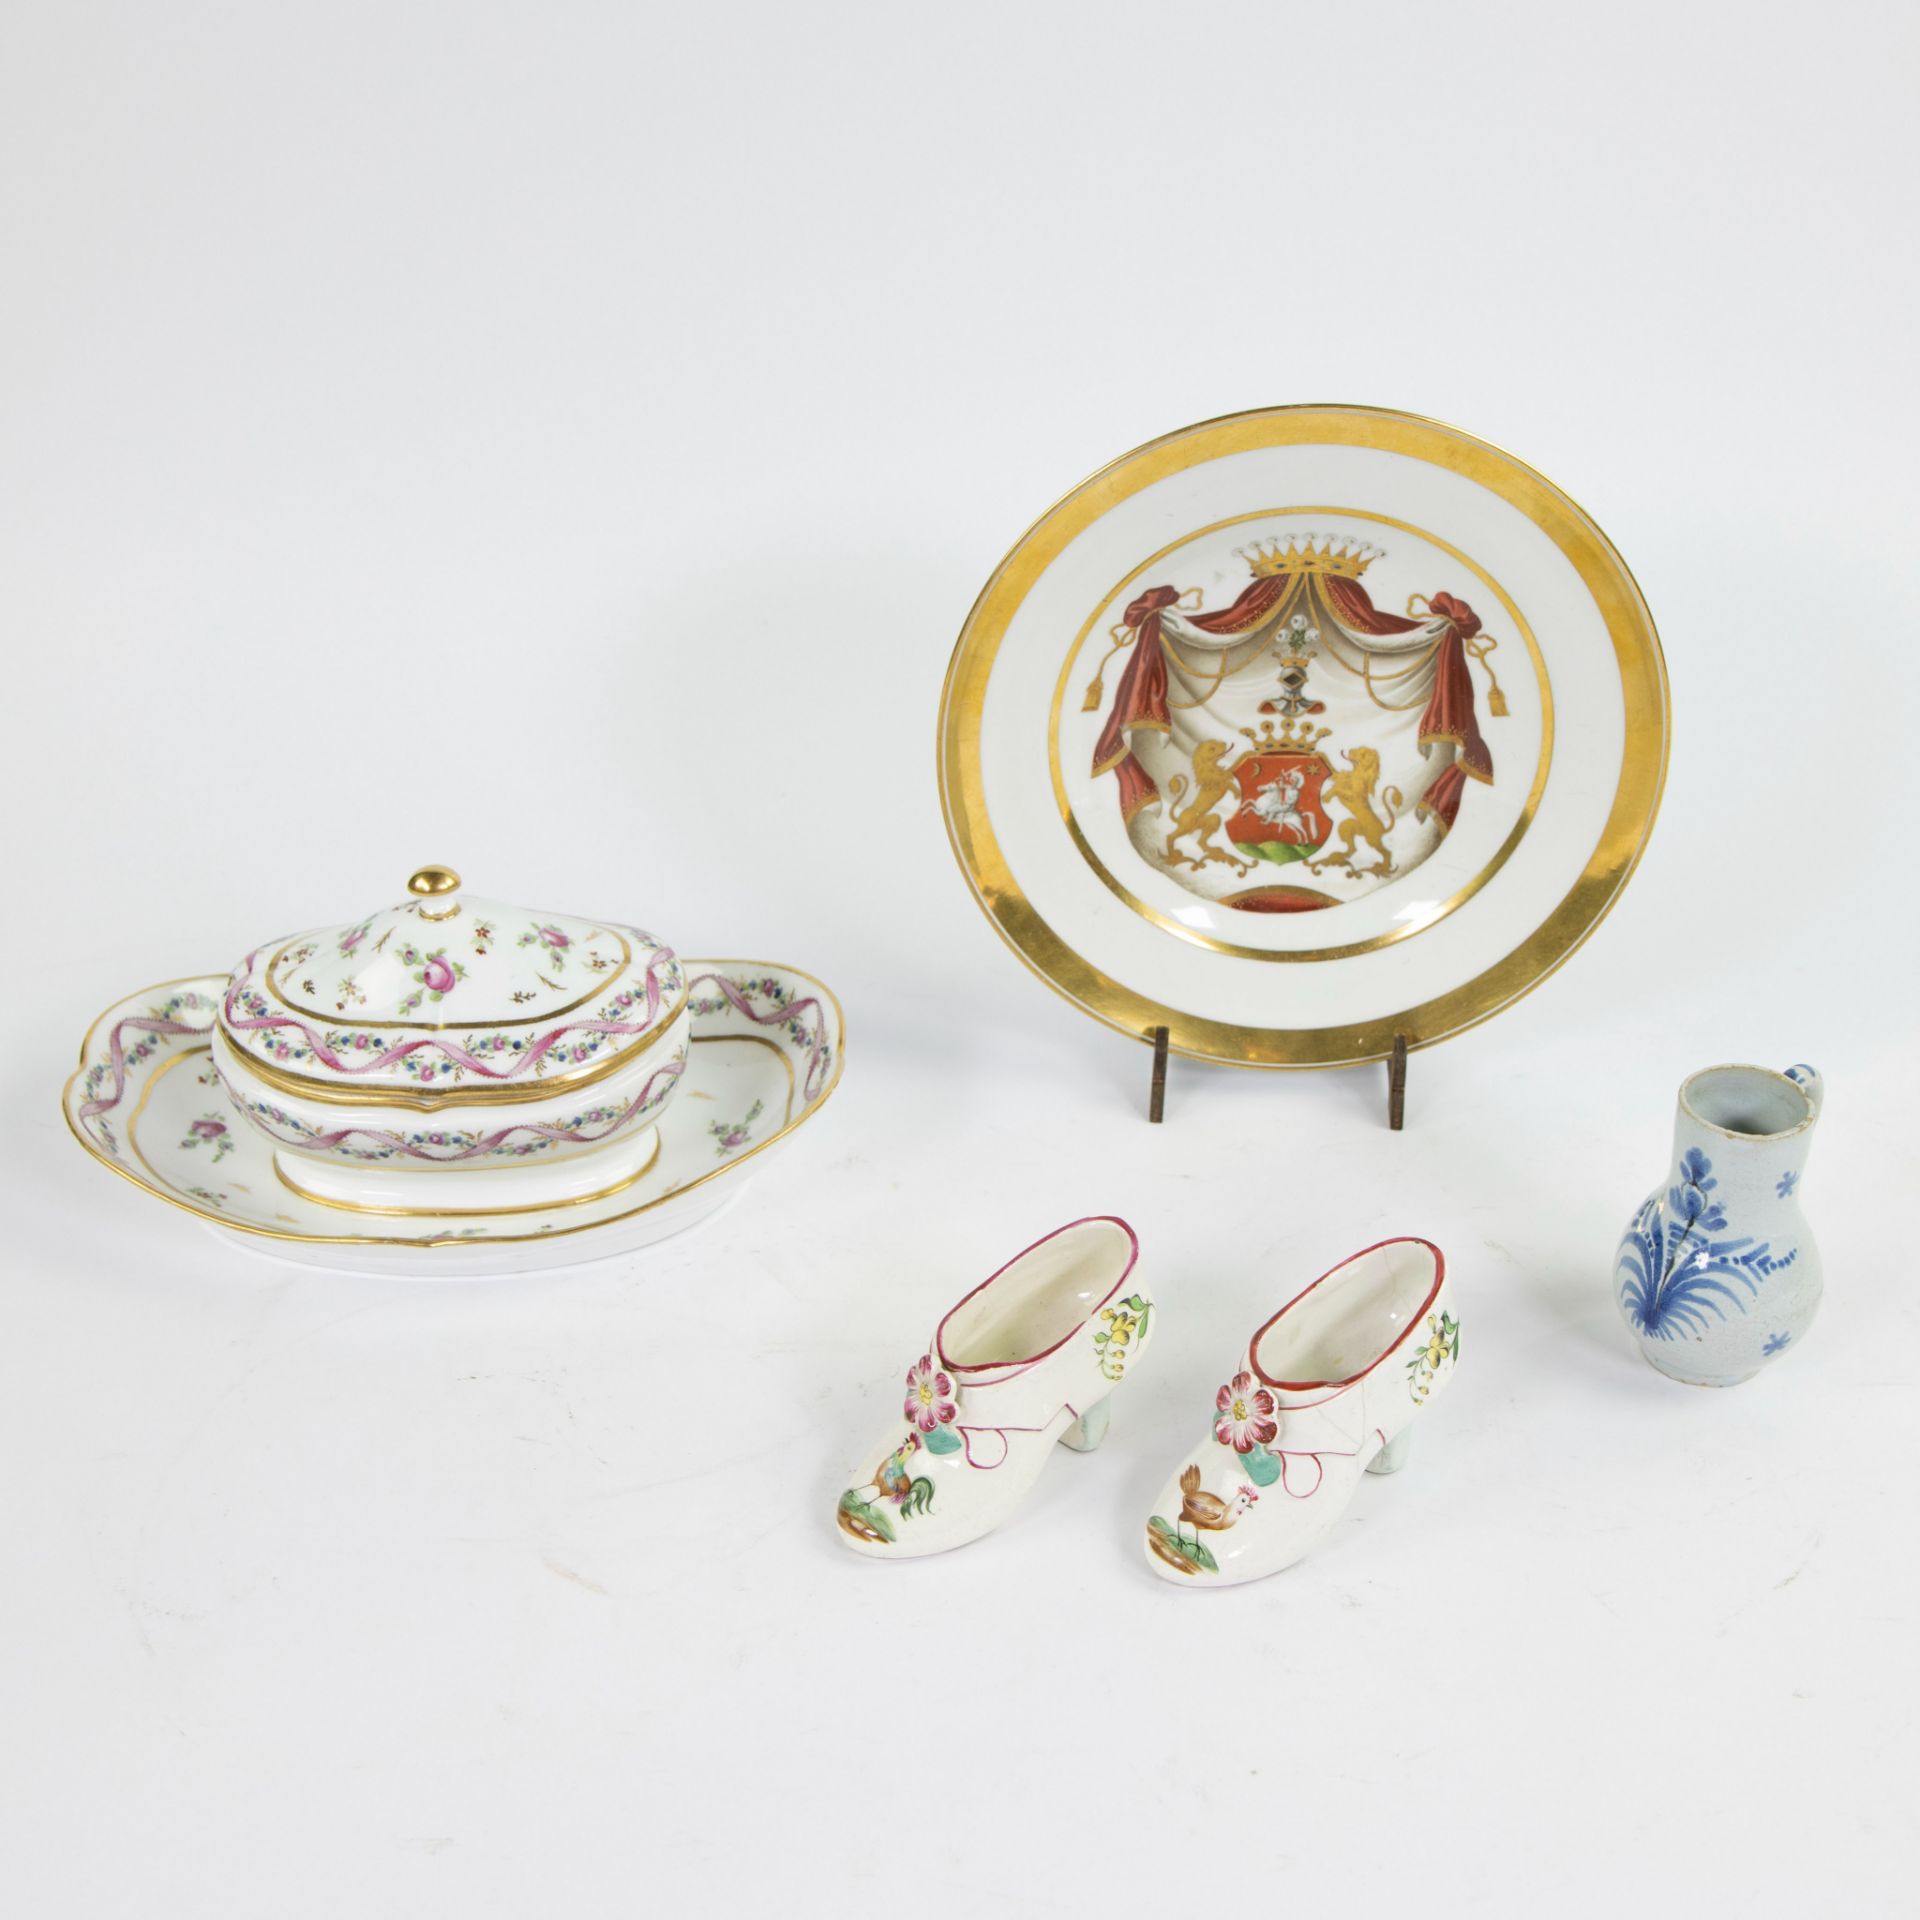 A collection of porcelain and earthenware, Paris 1830, Viennese plate early 19th century